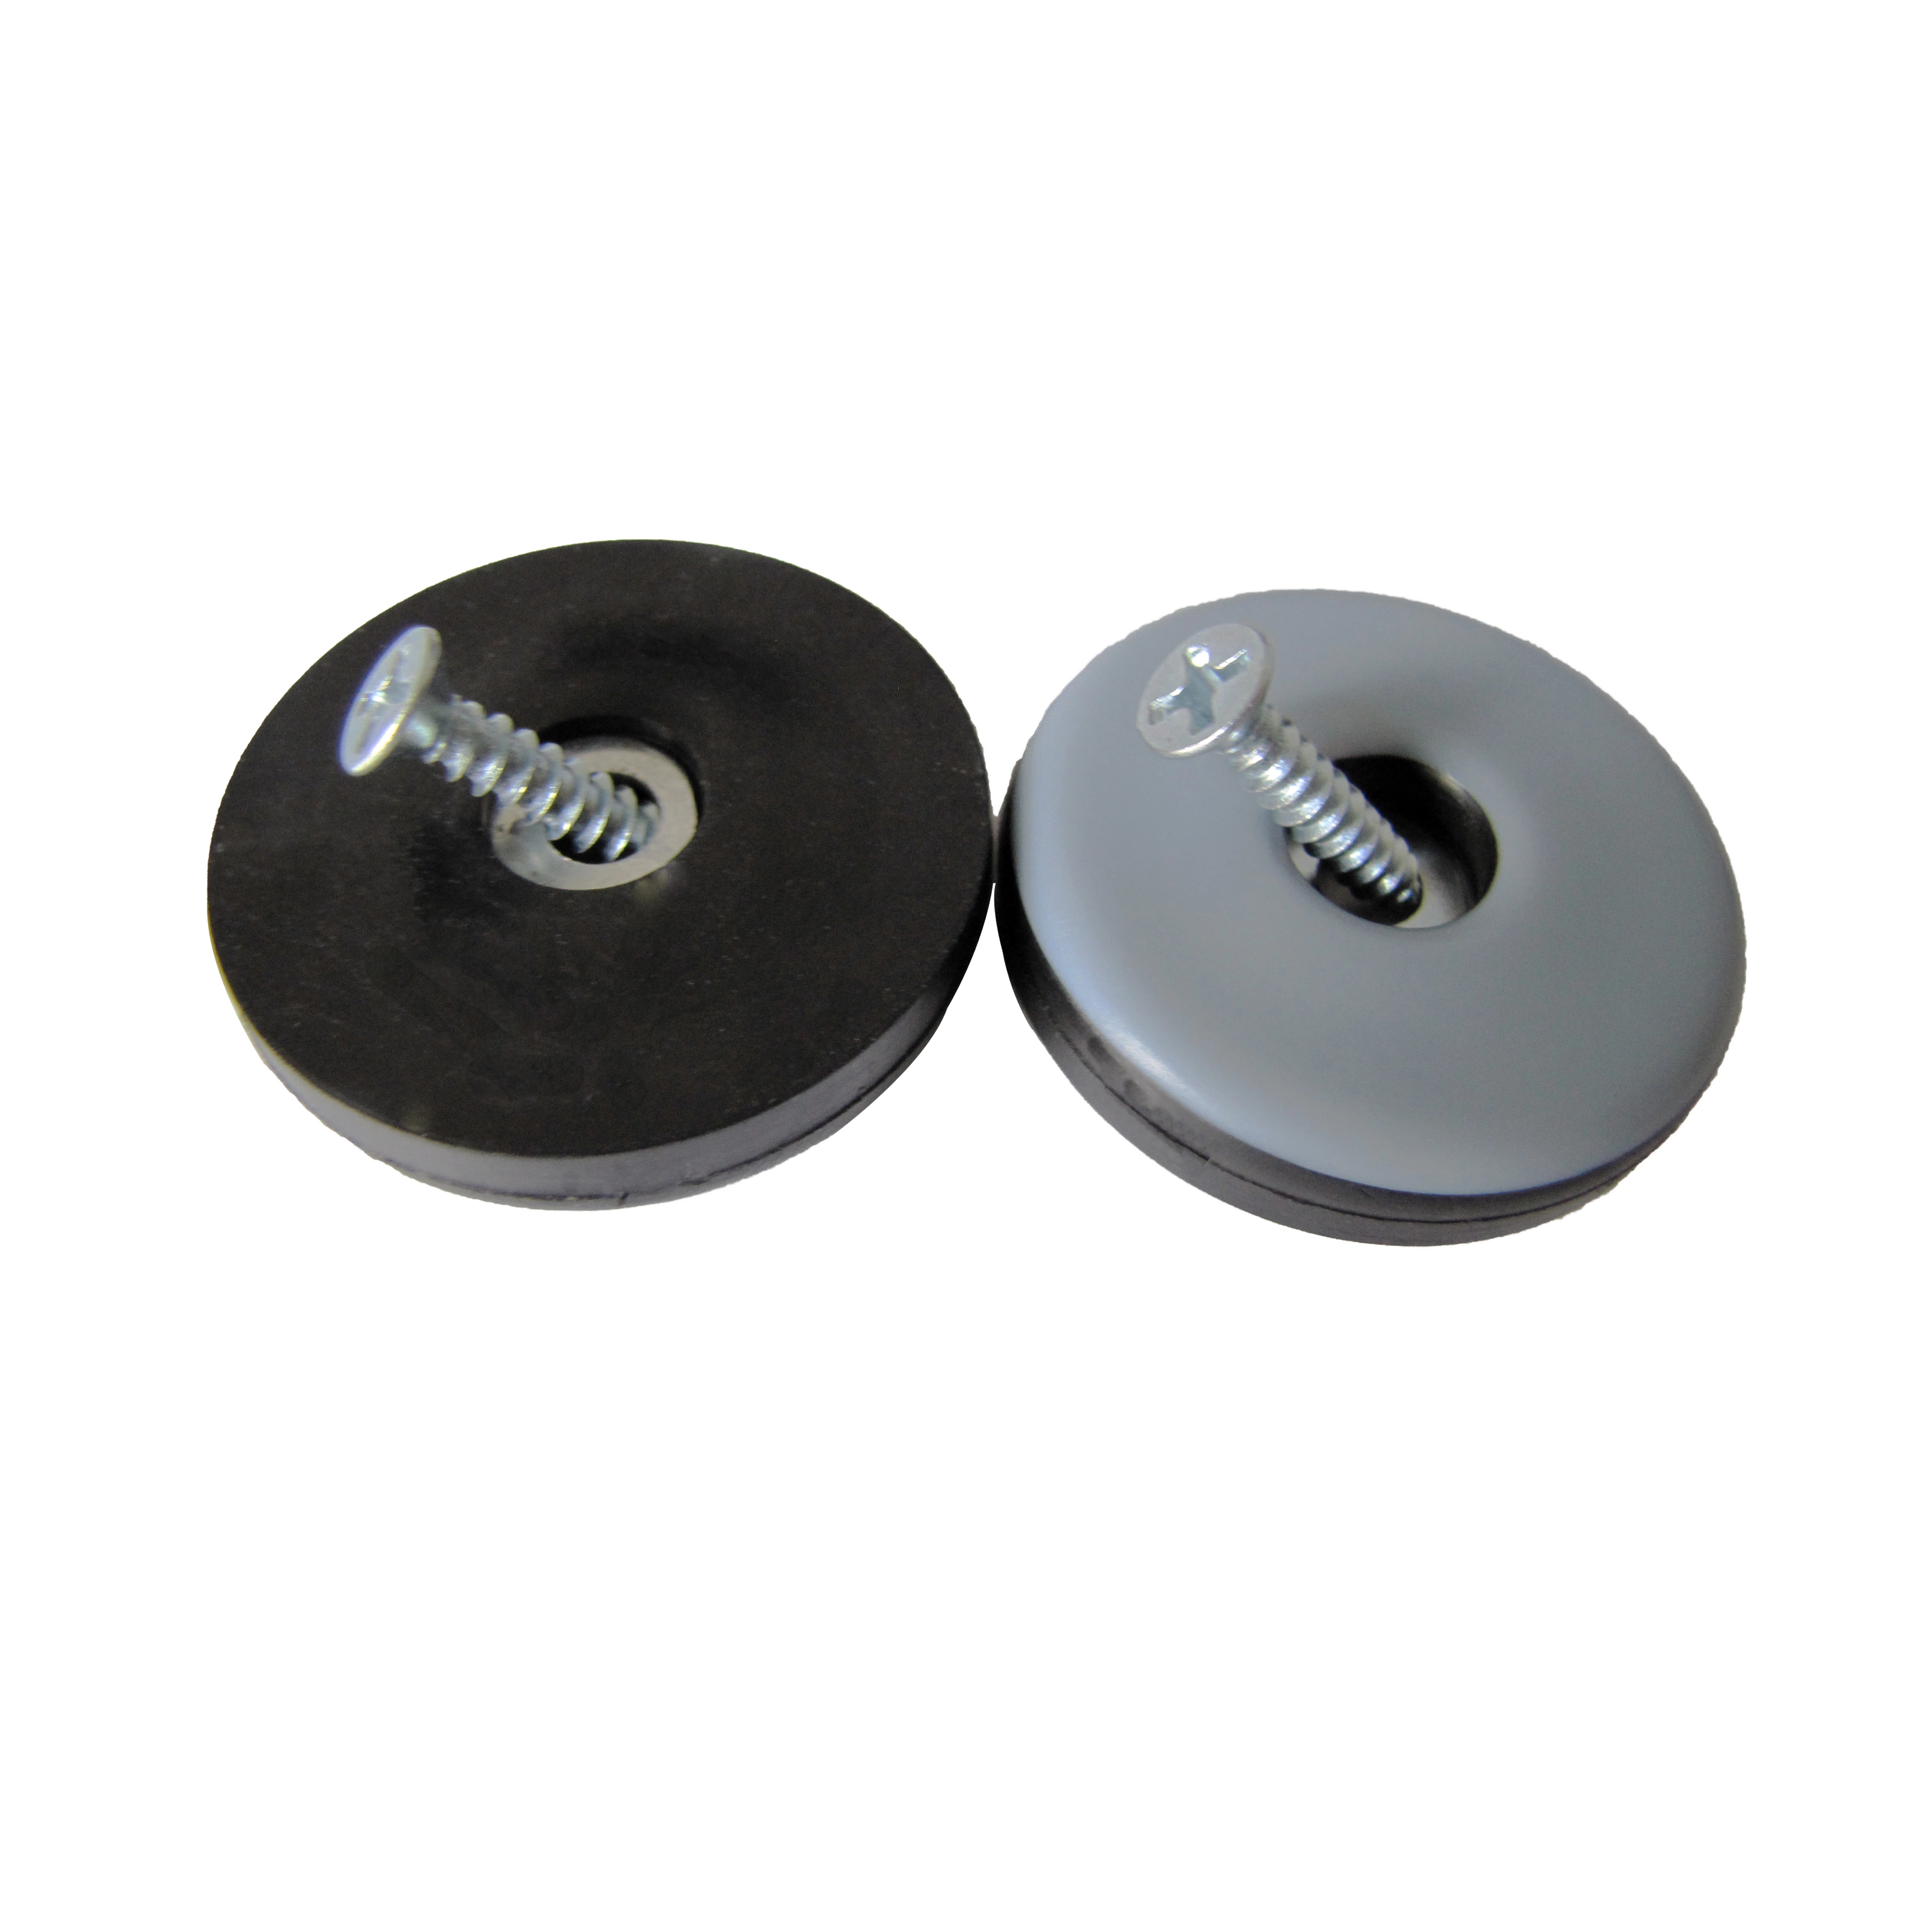 screw-on PTFE easy Glides for chair leg